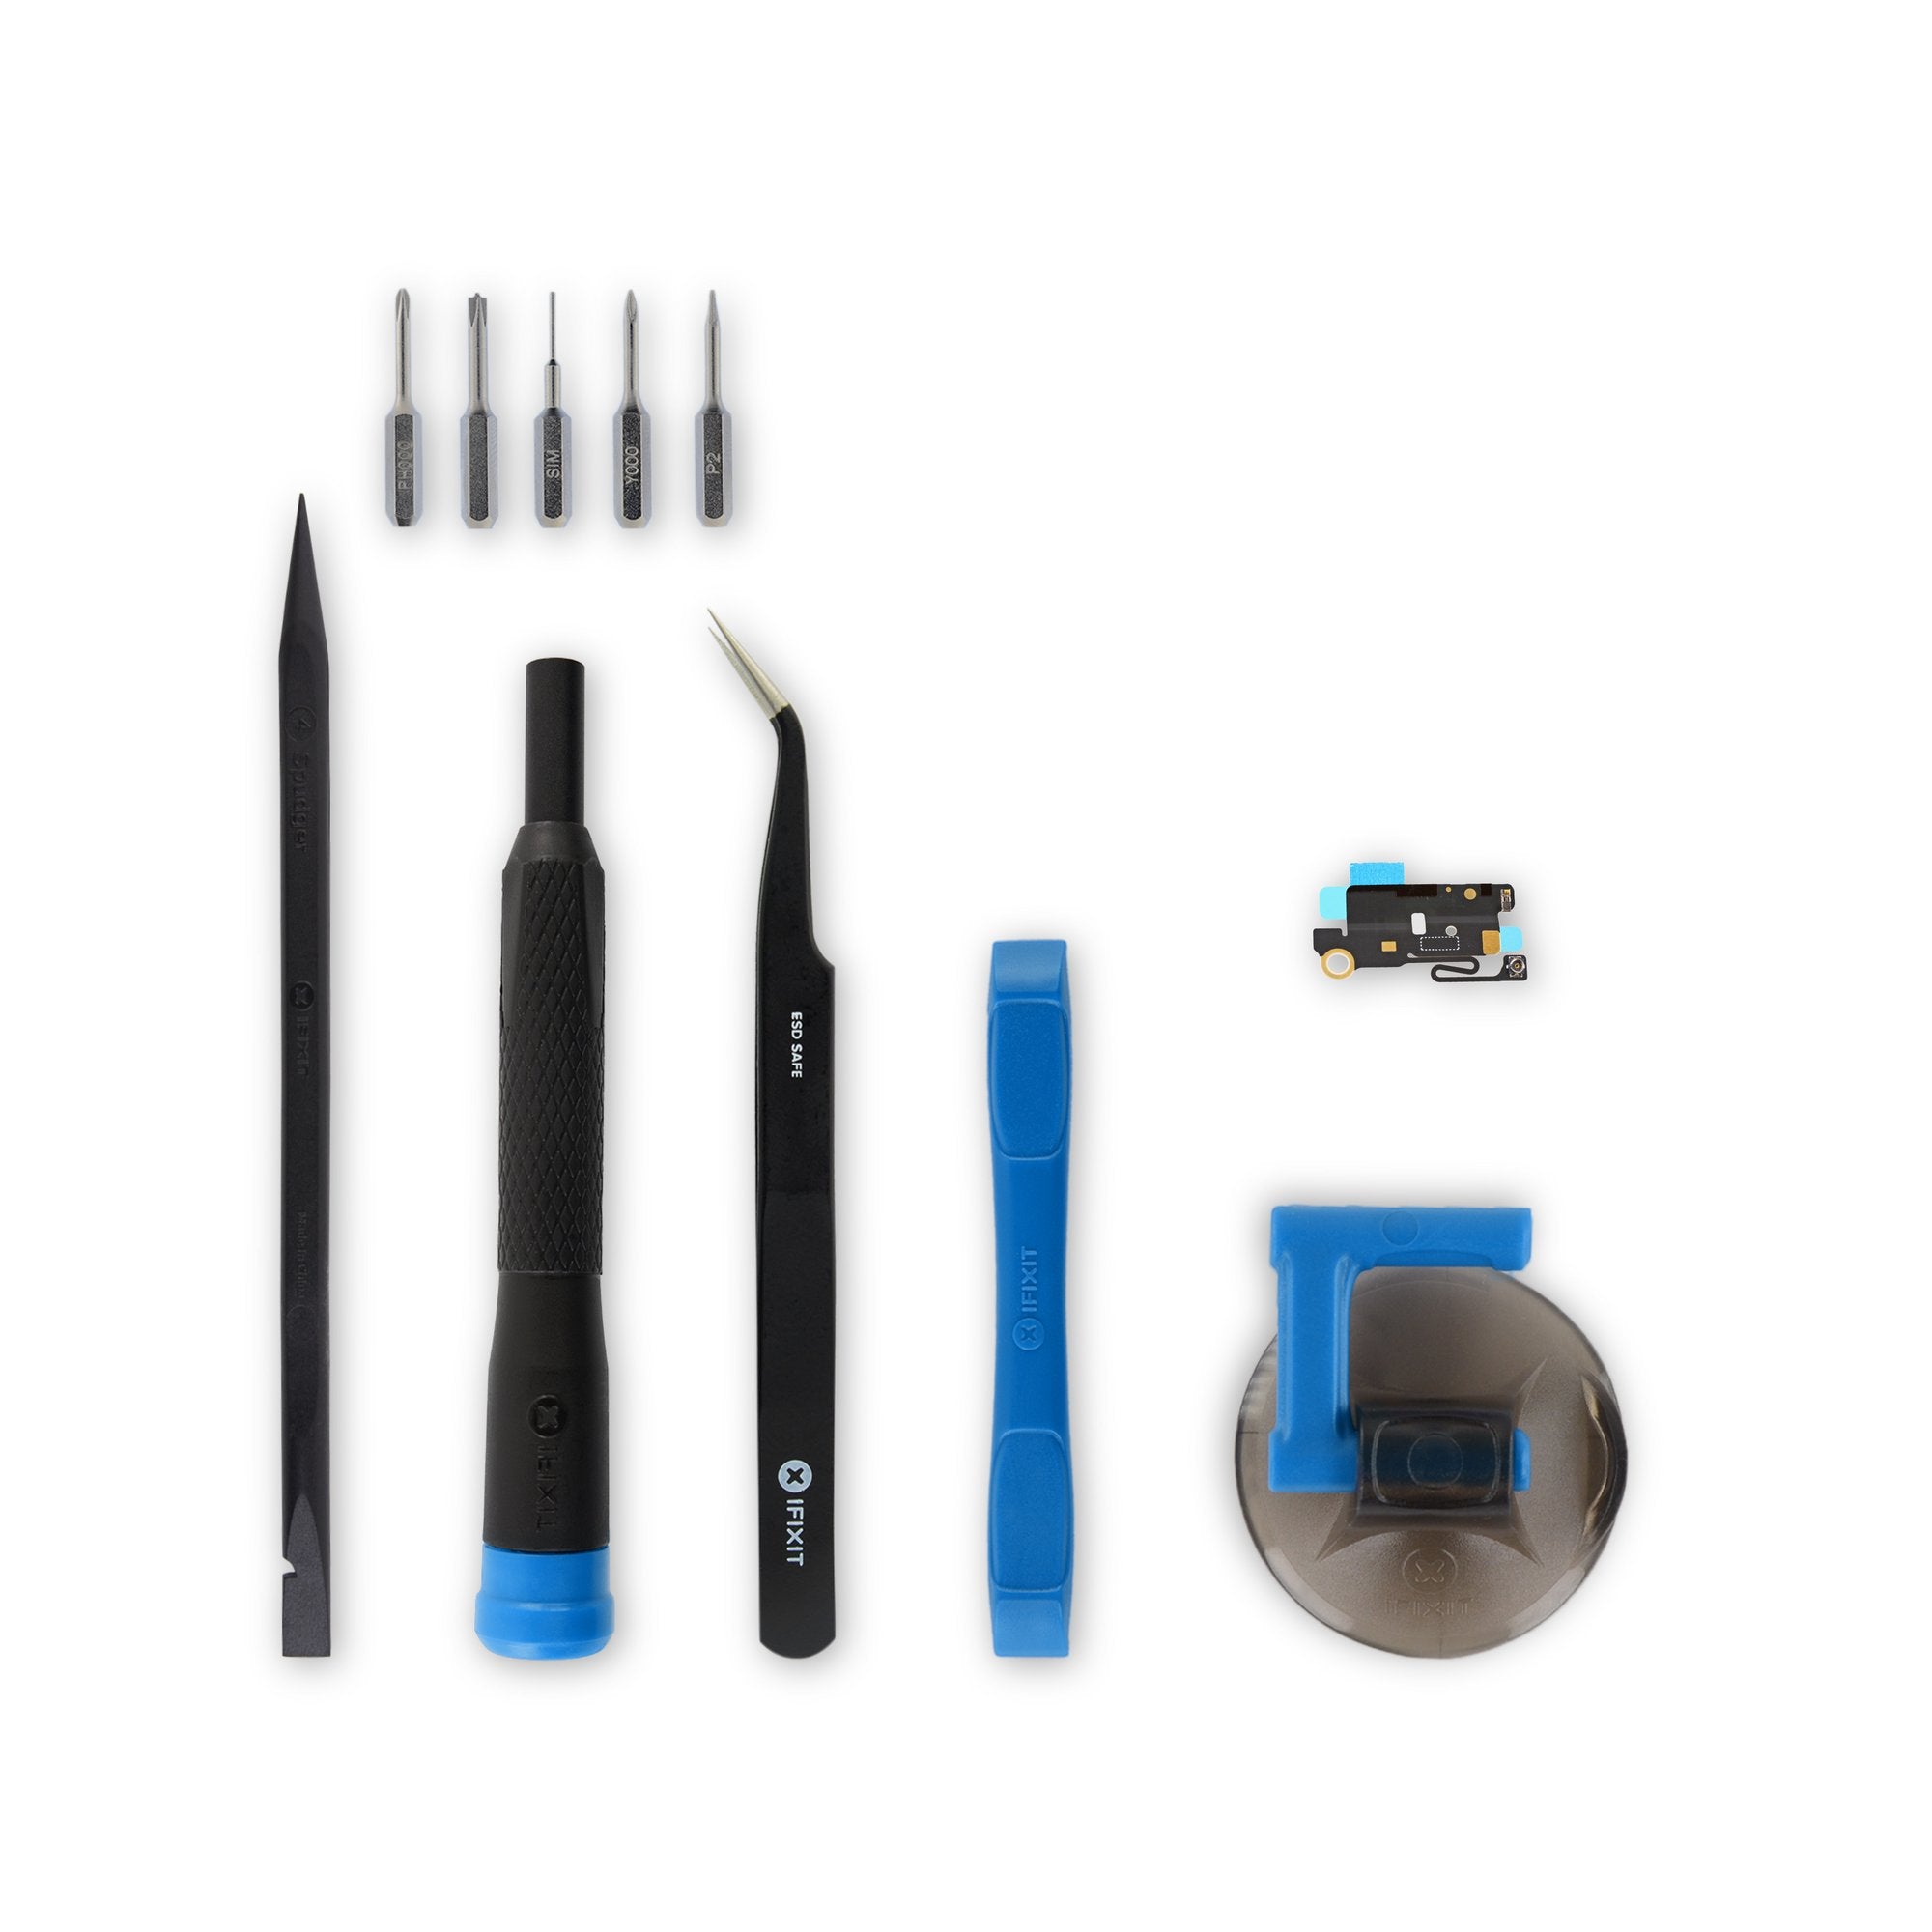 iPhone 5s/SE (1st Gen) Bluetooth and Wi-Fi Antenna New Fix Kit